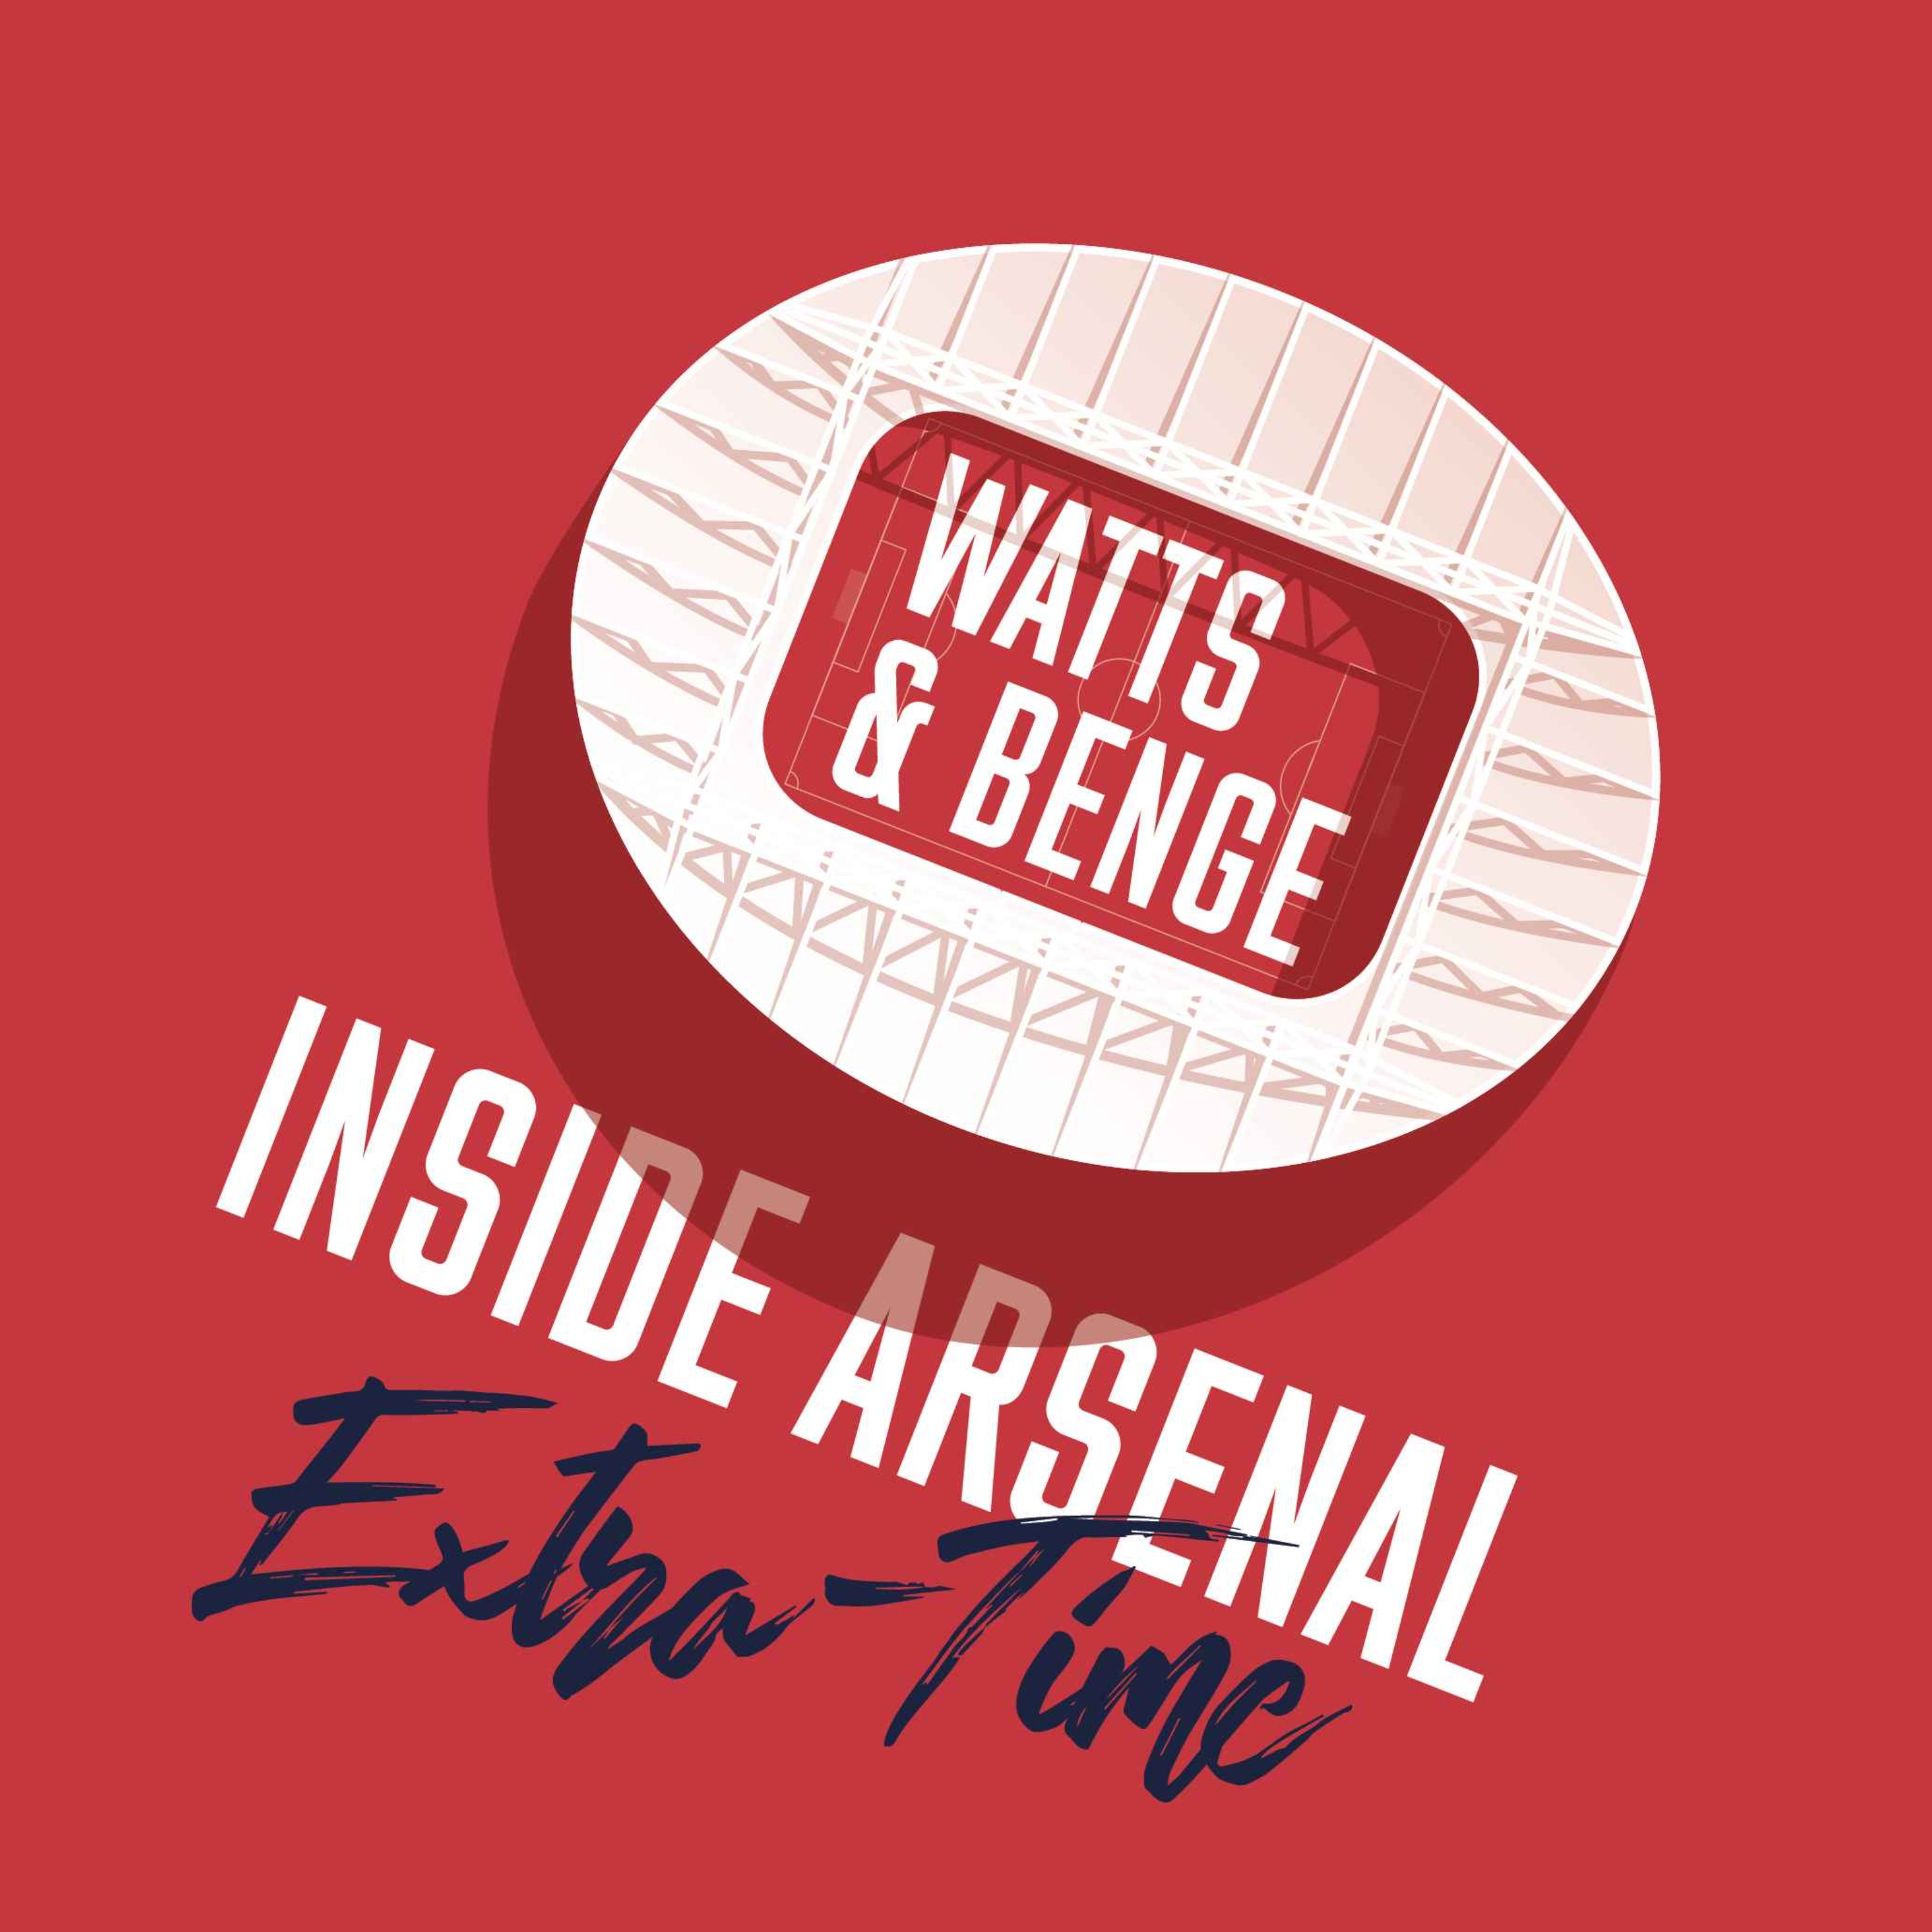 Extra-time with James Benge - Neto to Arsenal | Chelsea preview | Toney or Osimhen